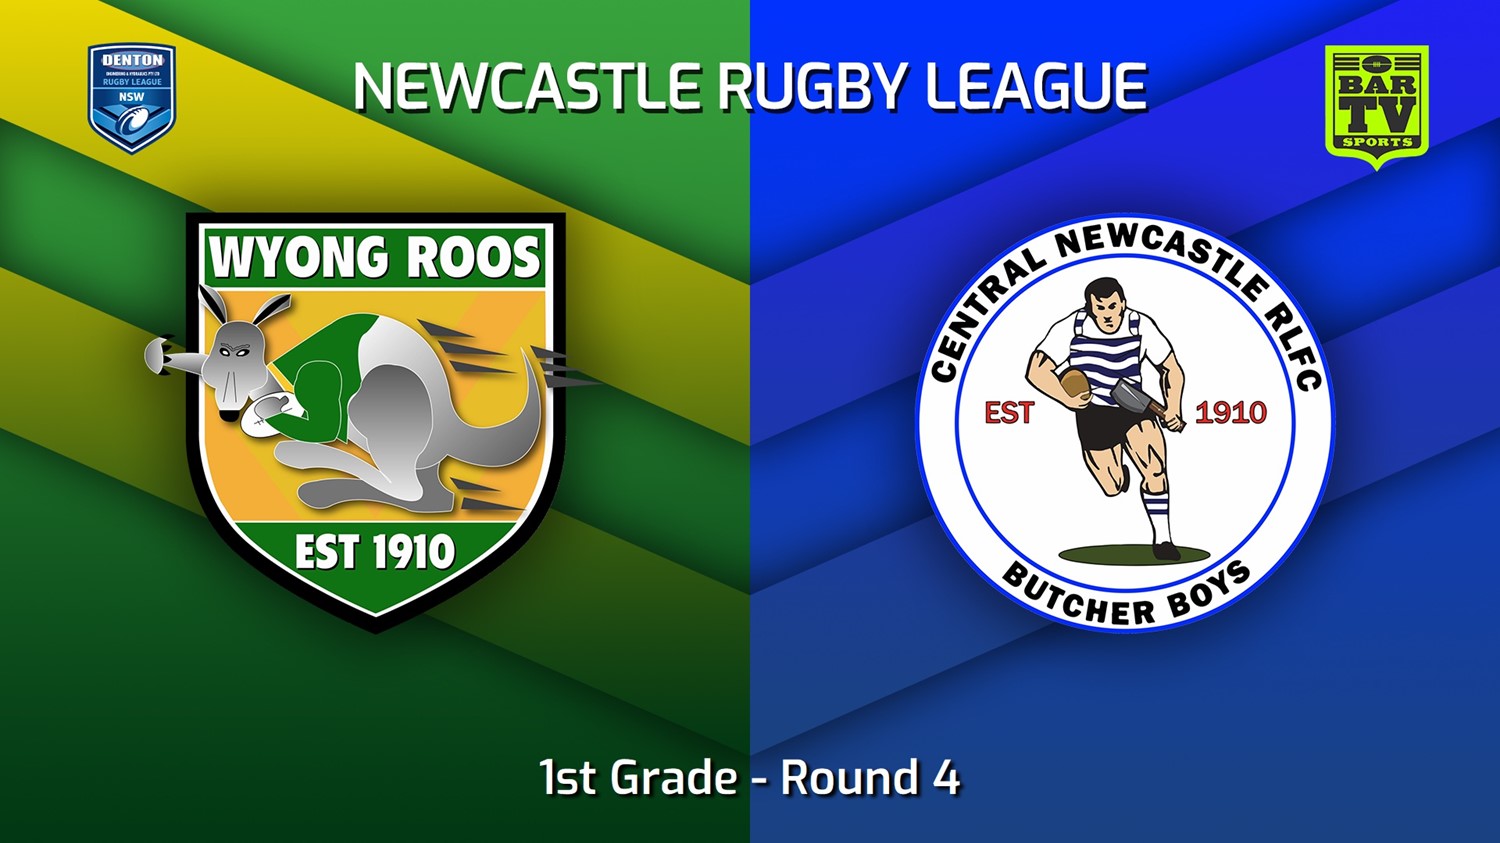 230415-Newcastle RL Round 4 - 1st Grade - Wyong Roos v Central Newcastle Butcher Boys Slate Image